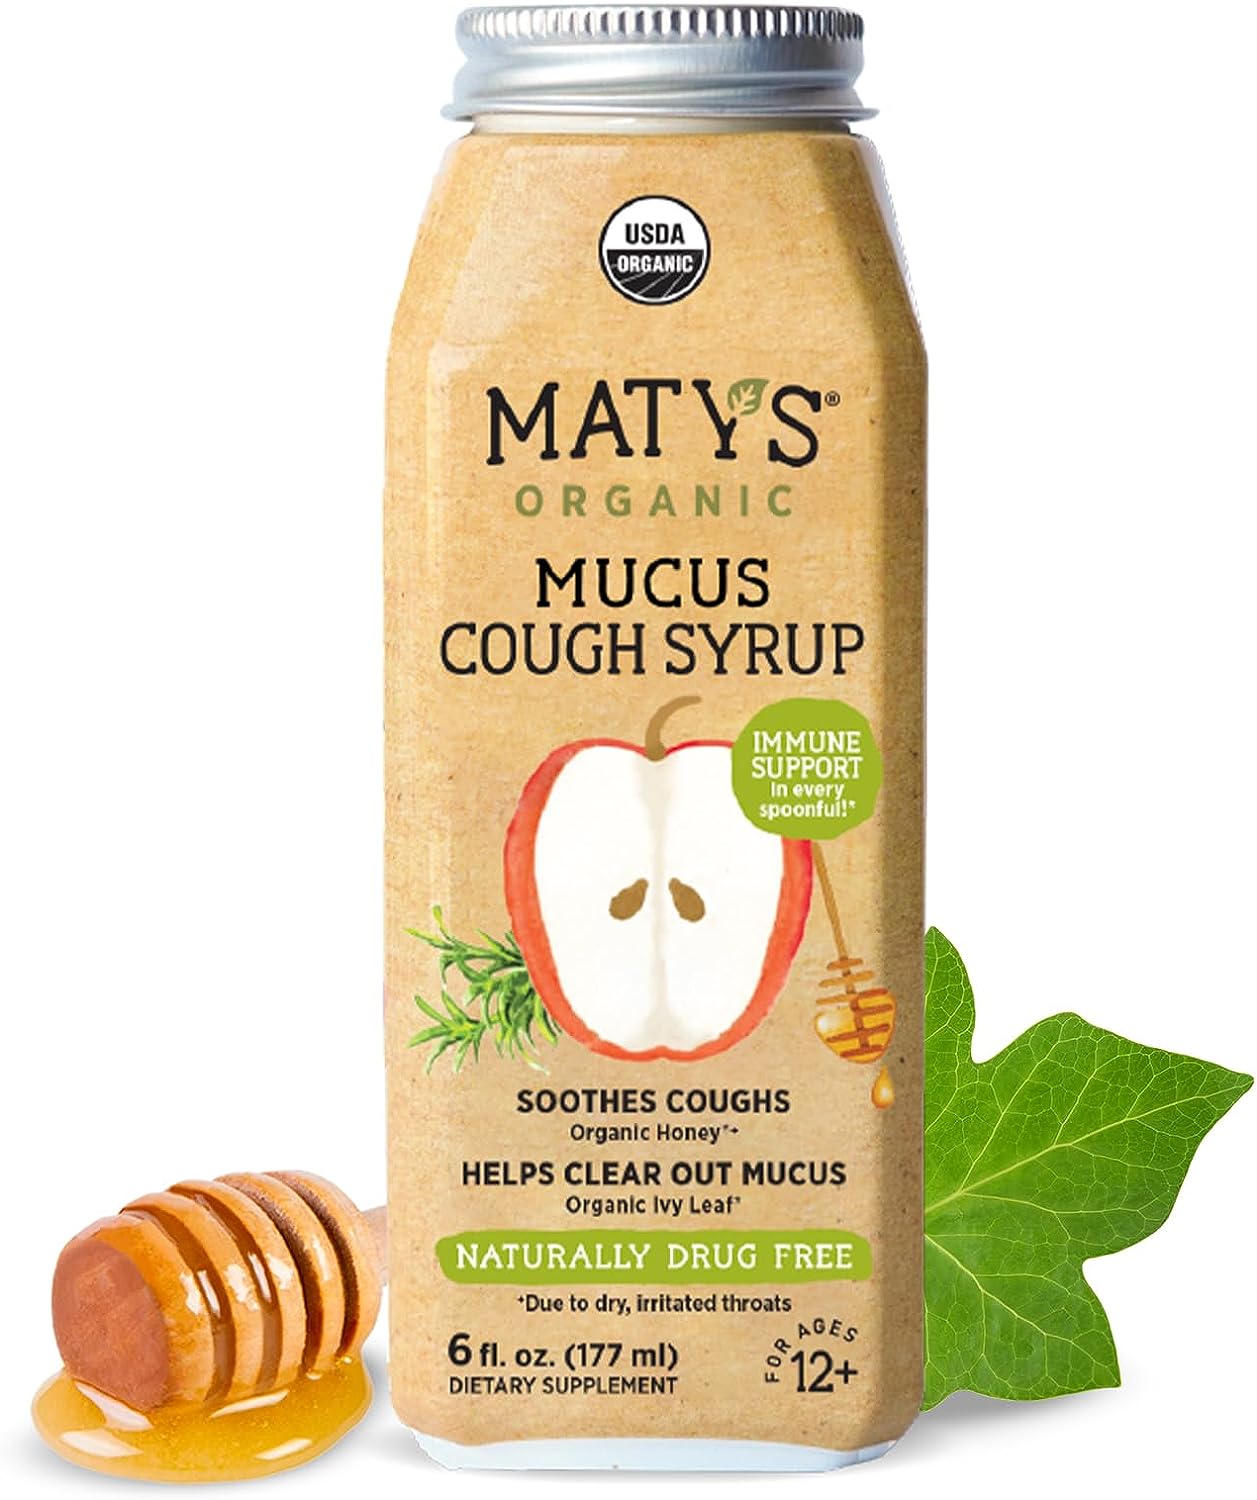 Matys Organic Adult Mucus Cough Syrup For Adults & Children 12 Years + Up, Soothing Cough & Mucus Relief Made with Organic English Ivy Leaf, Thyme Leaf, Honey & Zinc, Alcohol & Drug Free, 6 Fl Oz